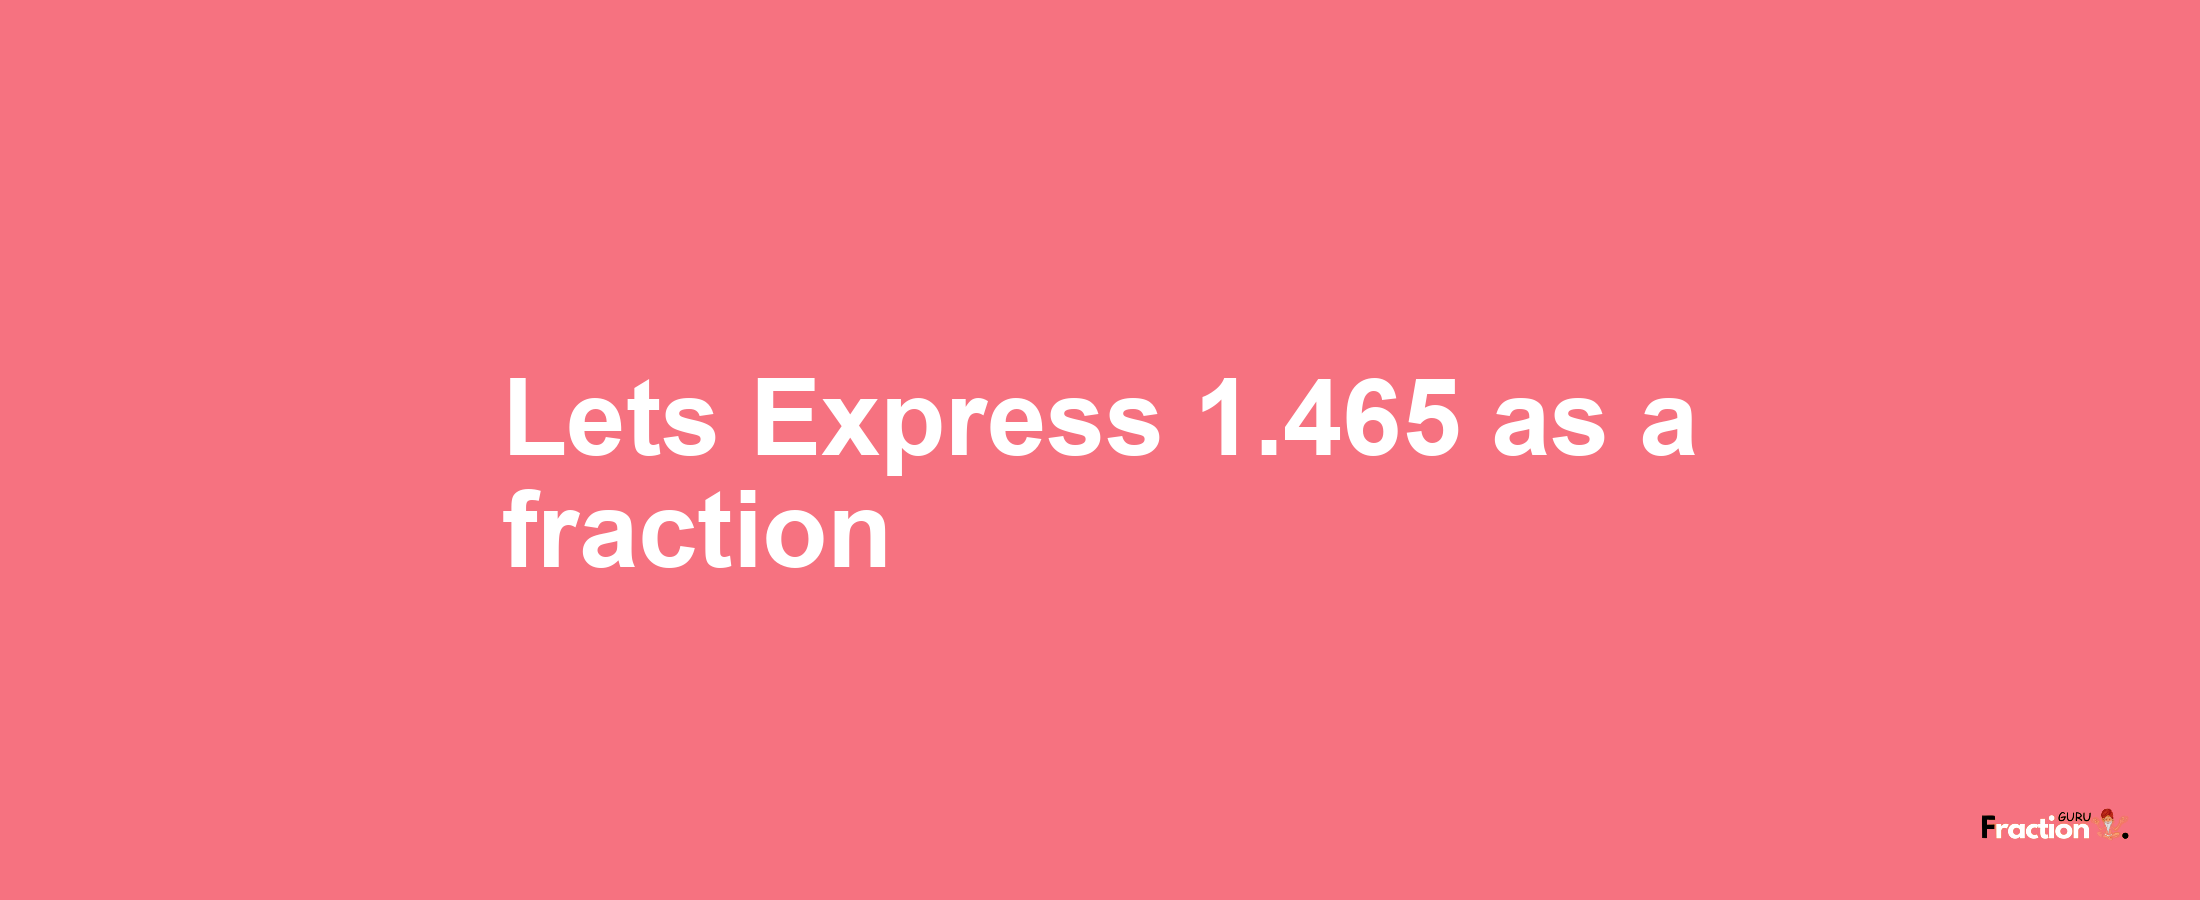 Lets Express 1.465 as afraction